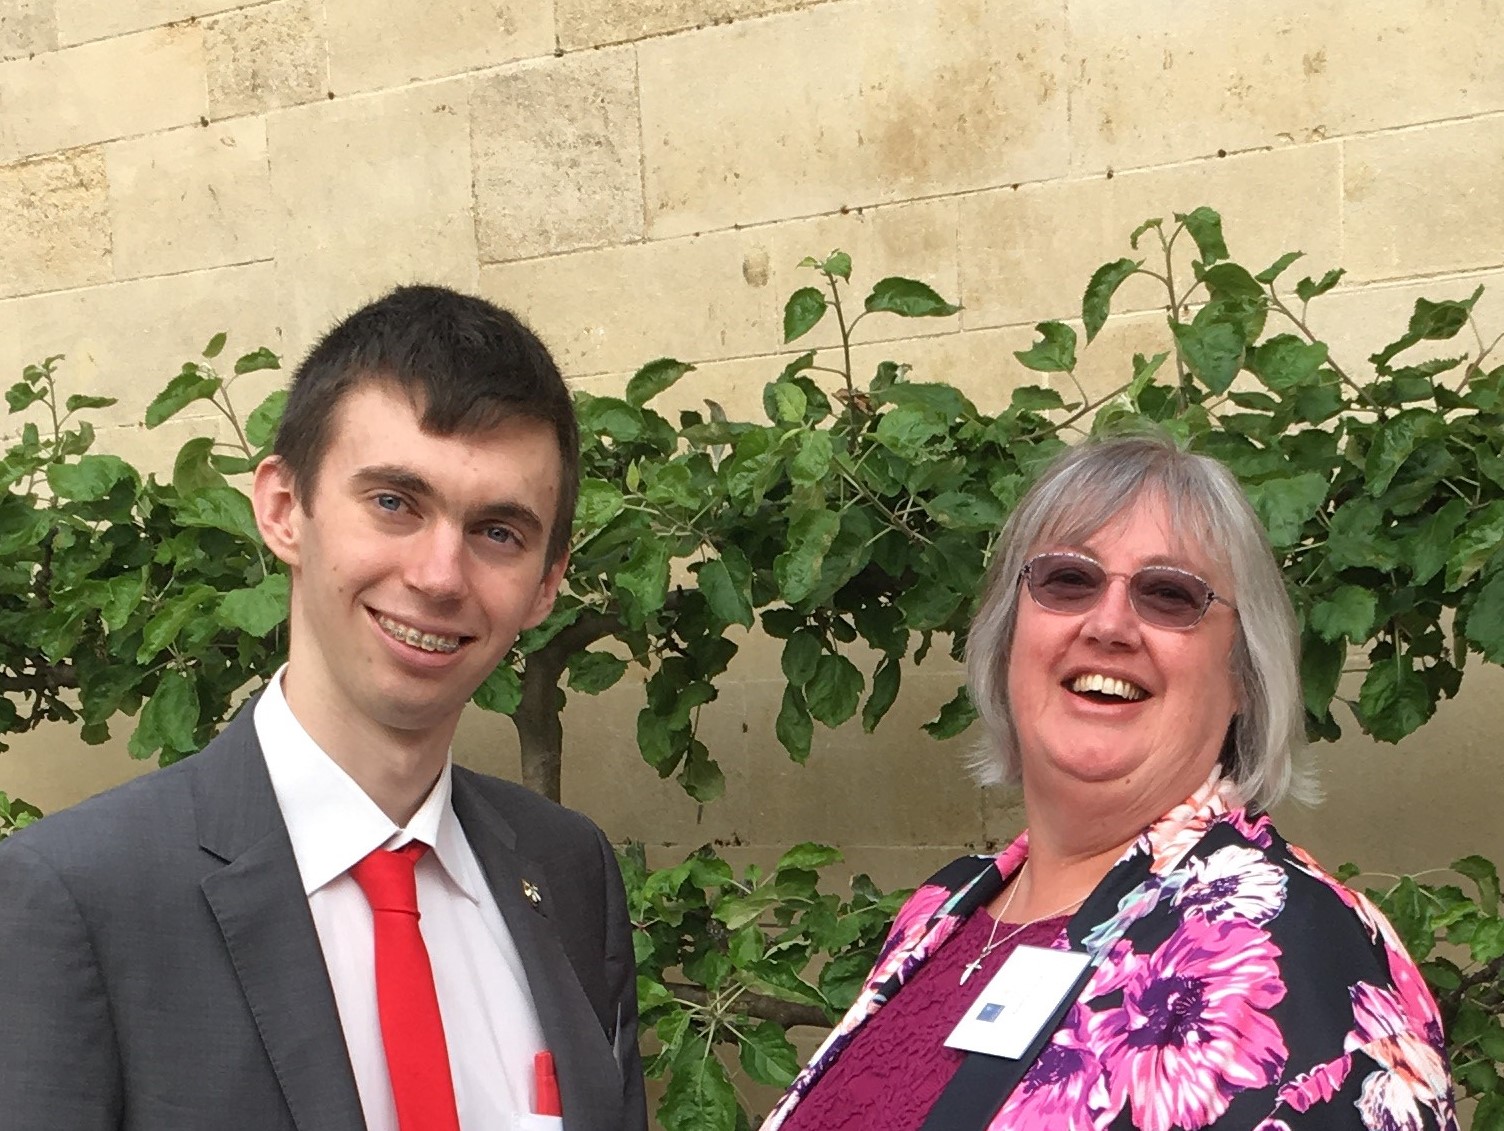 Matthew Judson and his former teacher Christina Pearce smile at Inspirational Teacher award ceremony in May 2018